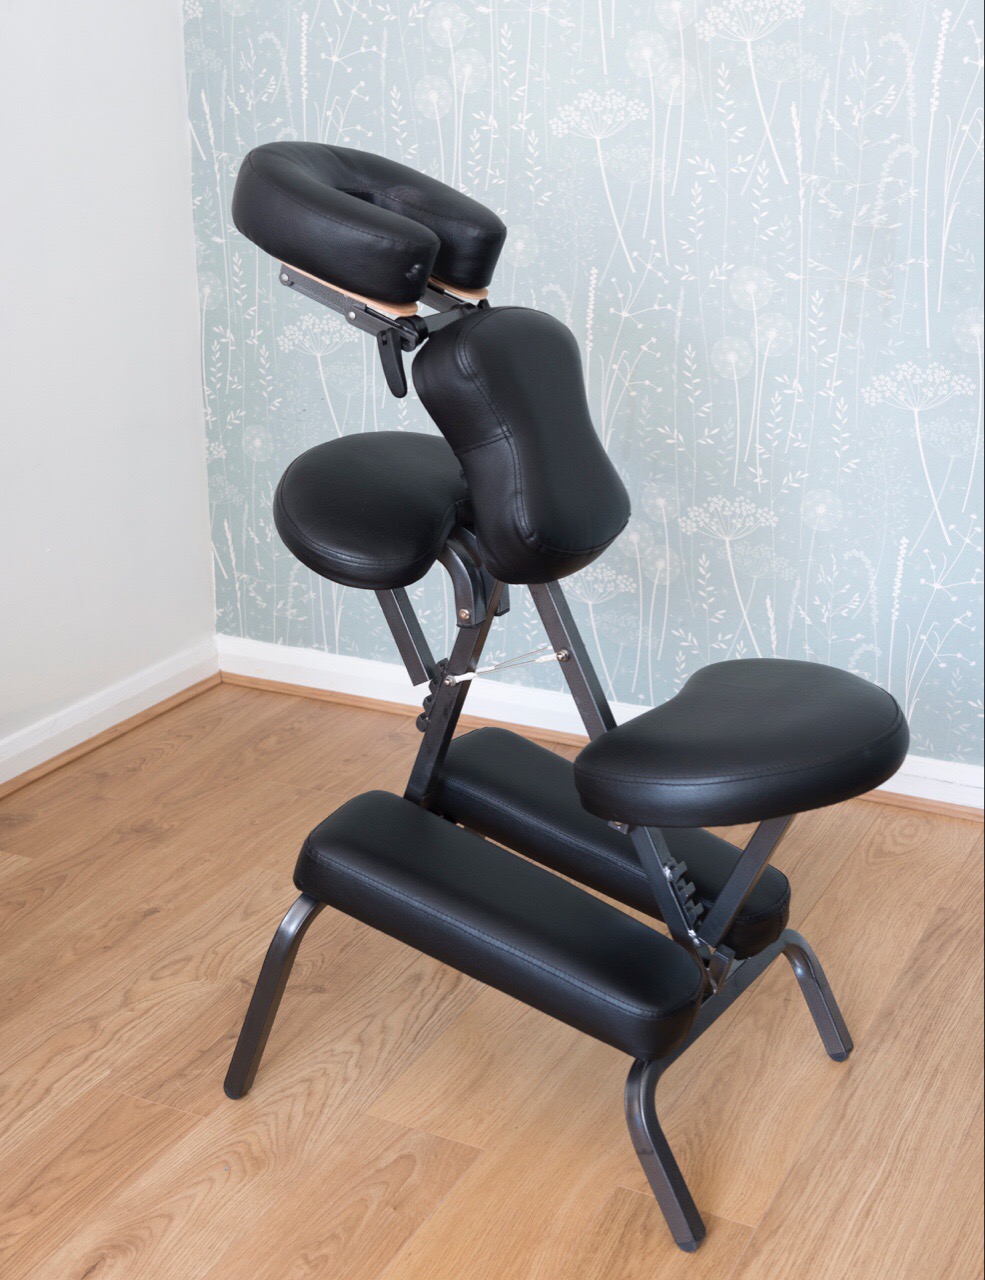 Clothed, oil free massage chair